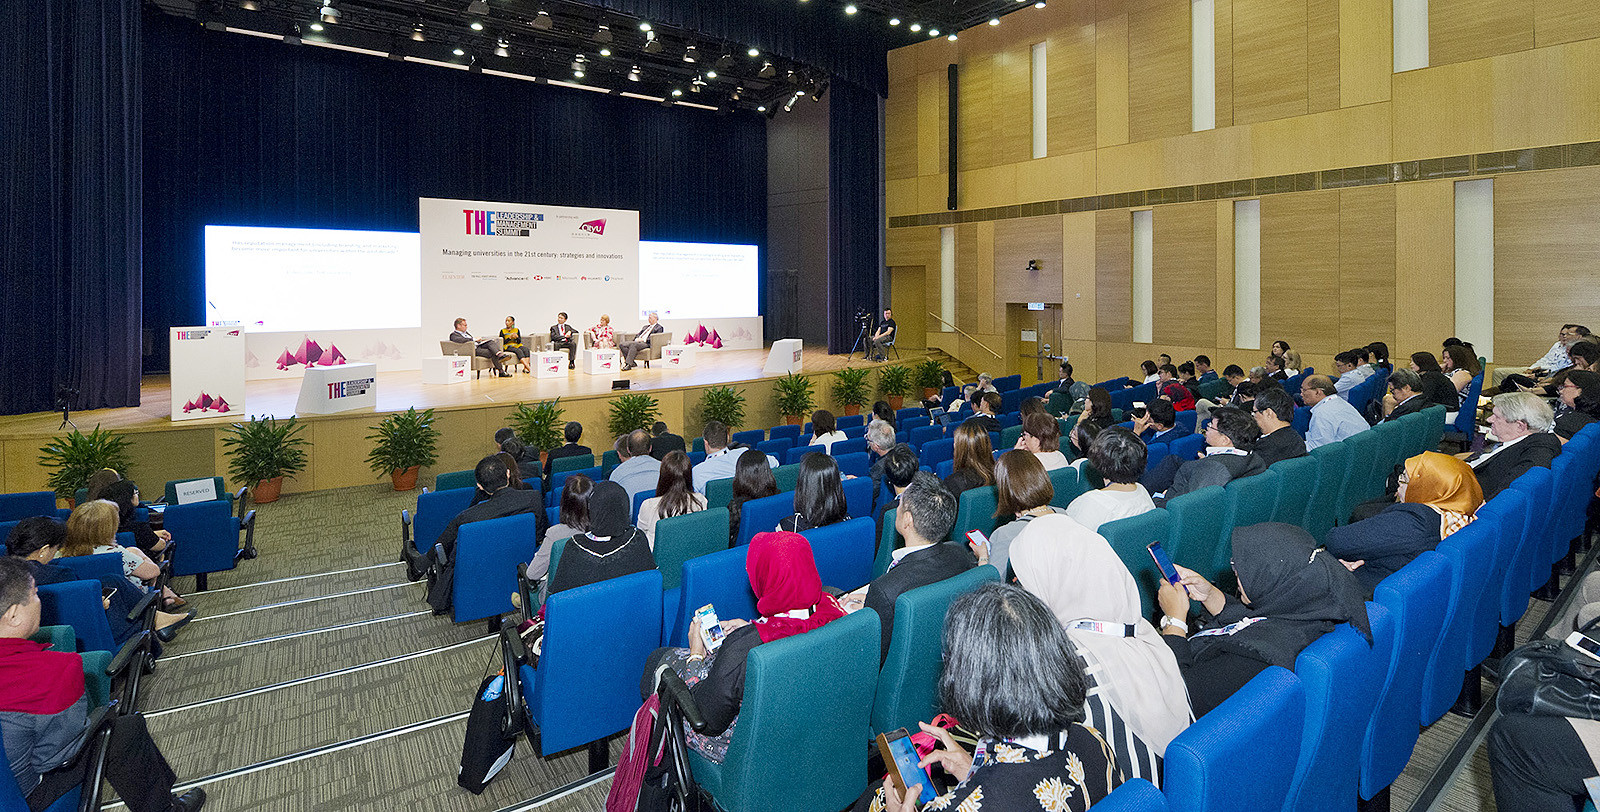 More than 200 guests from over 30 countries or regions attended the Summit.